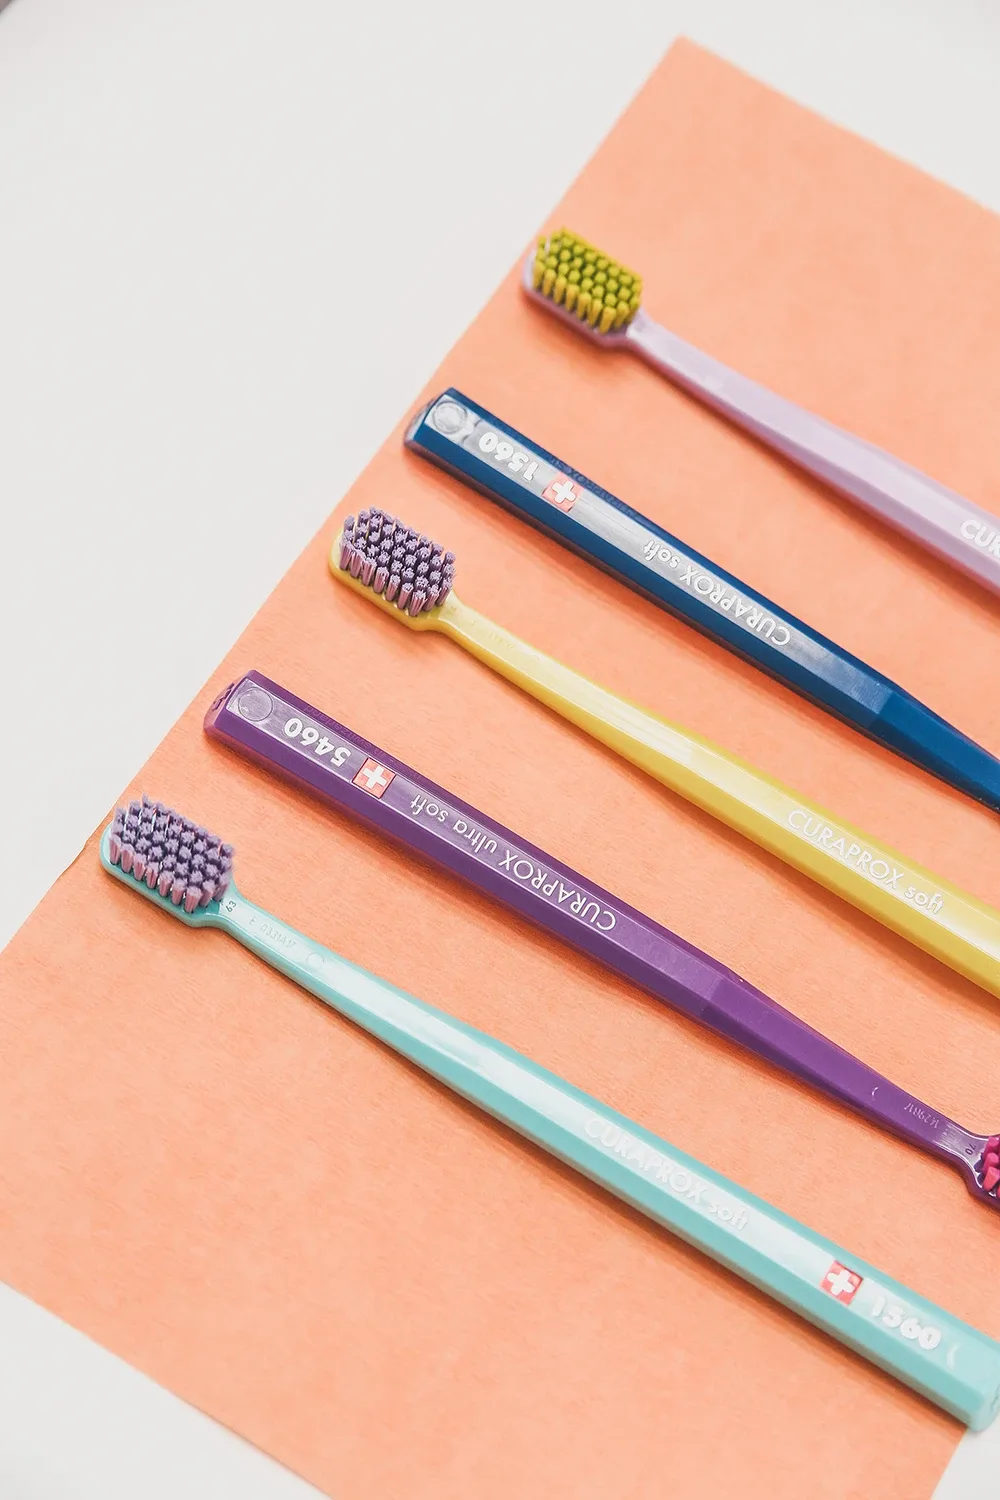 Toot brushes